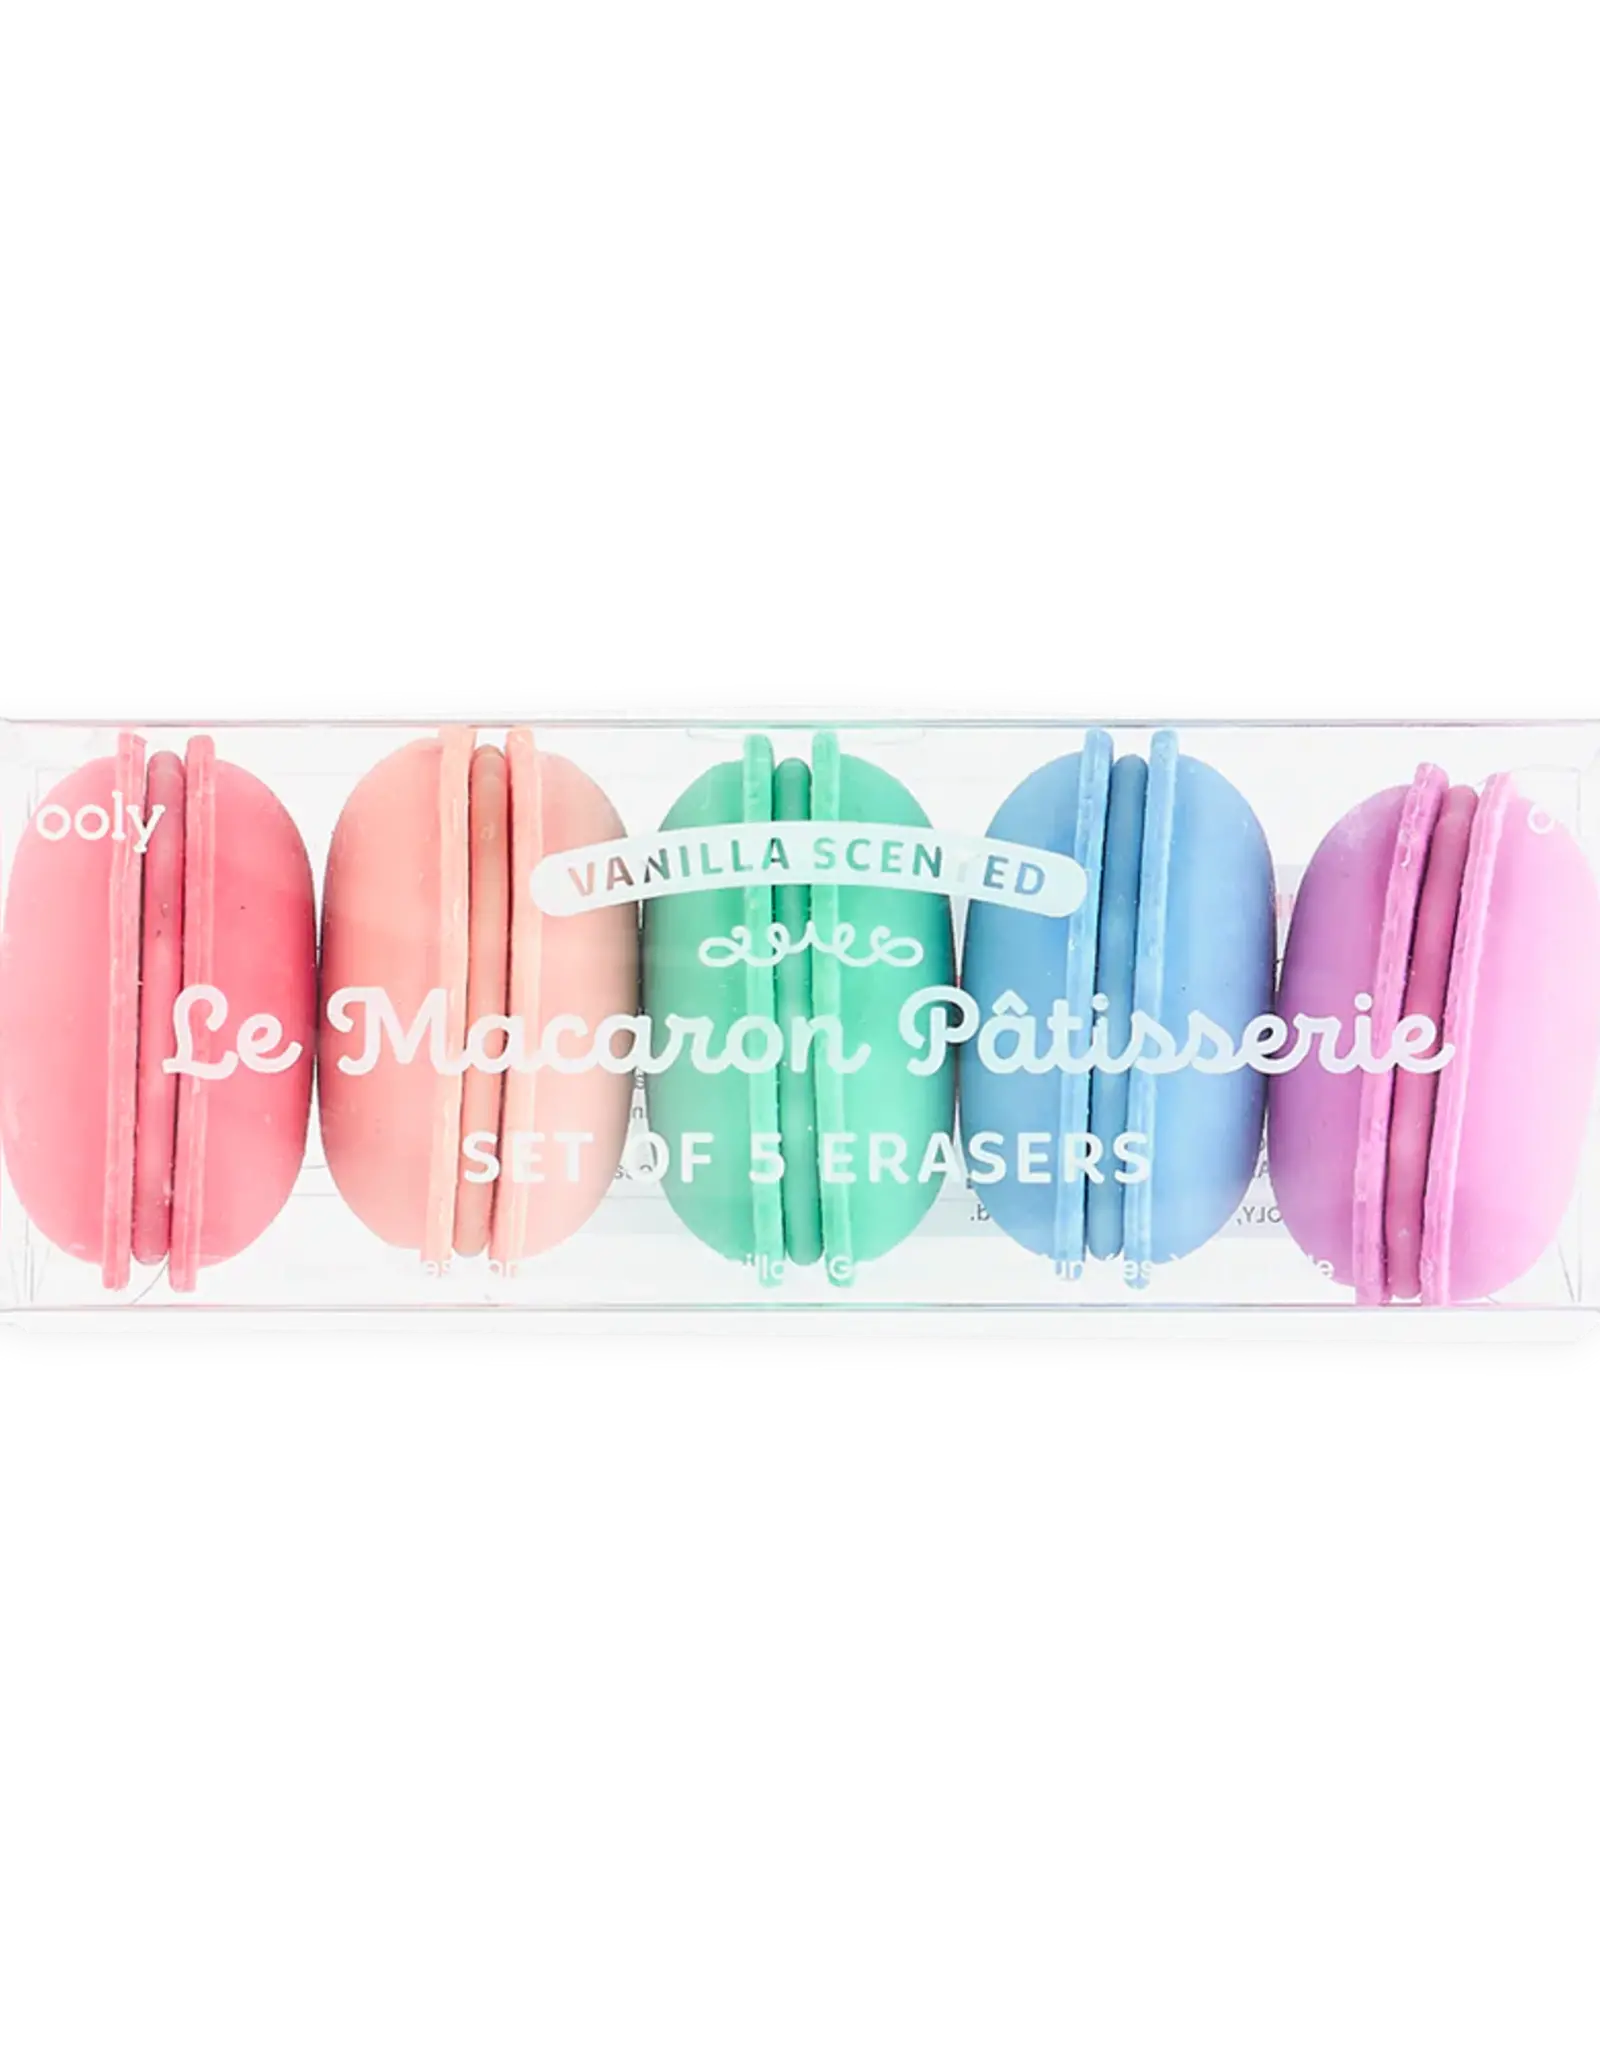 Ooly DBA International Arrivals Scented Erasers - set of 5: Le Macaron Patisserie